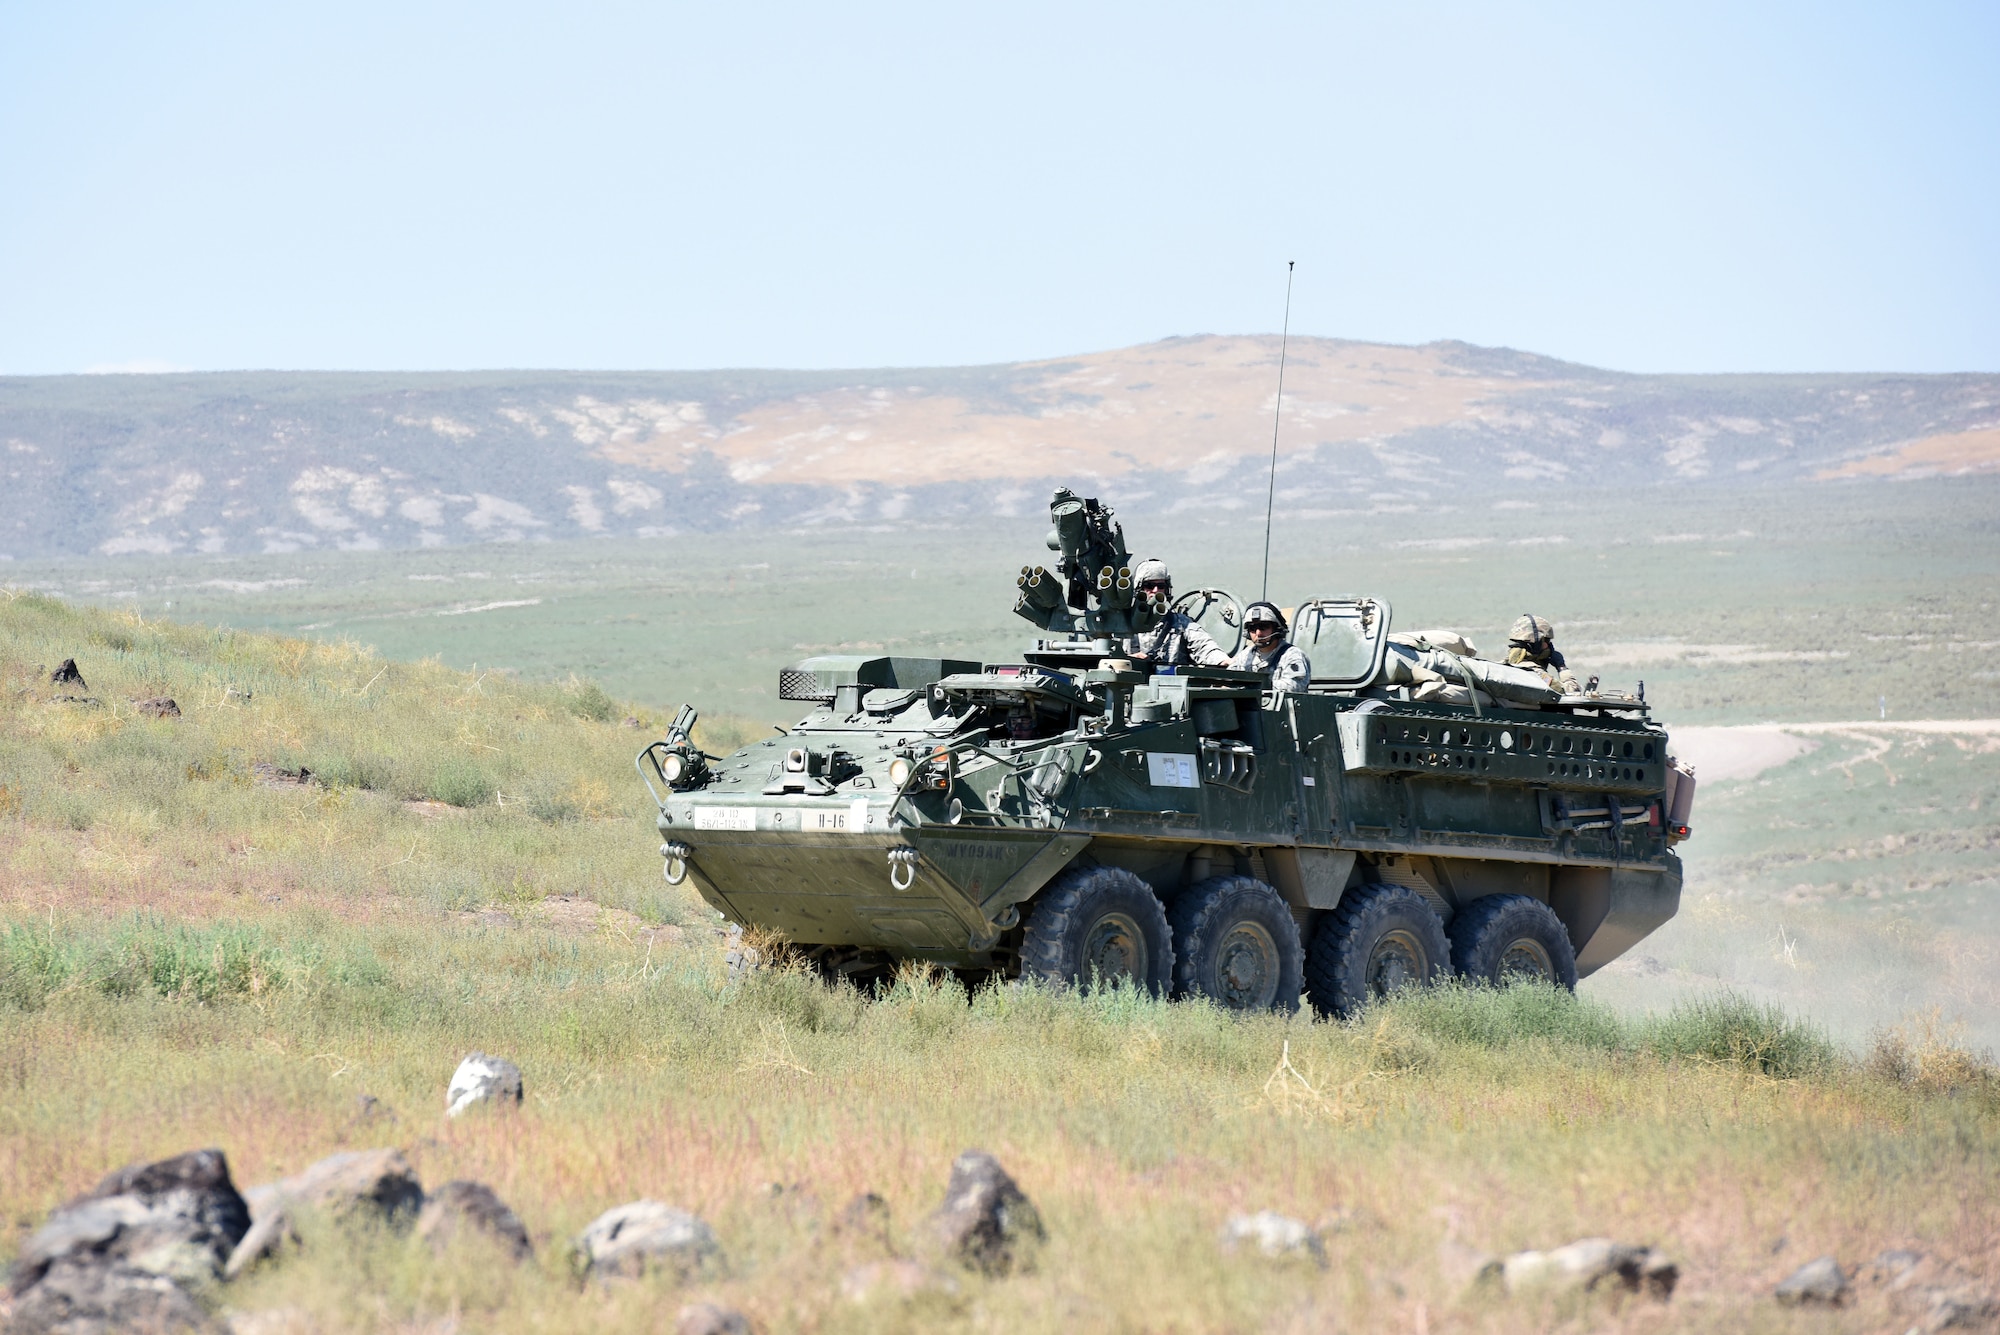 A Stryker vehicle with the 56th Stryker Brigade, Pennsylvania Army National Guard, heads to a remote location.